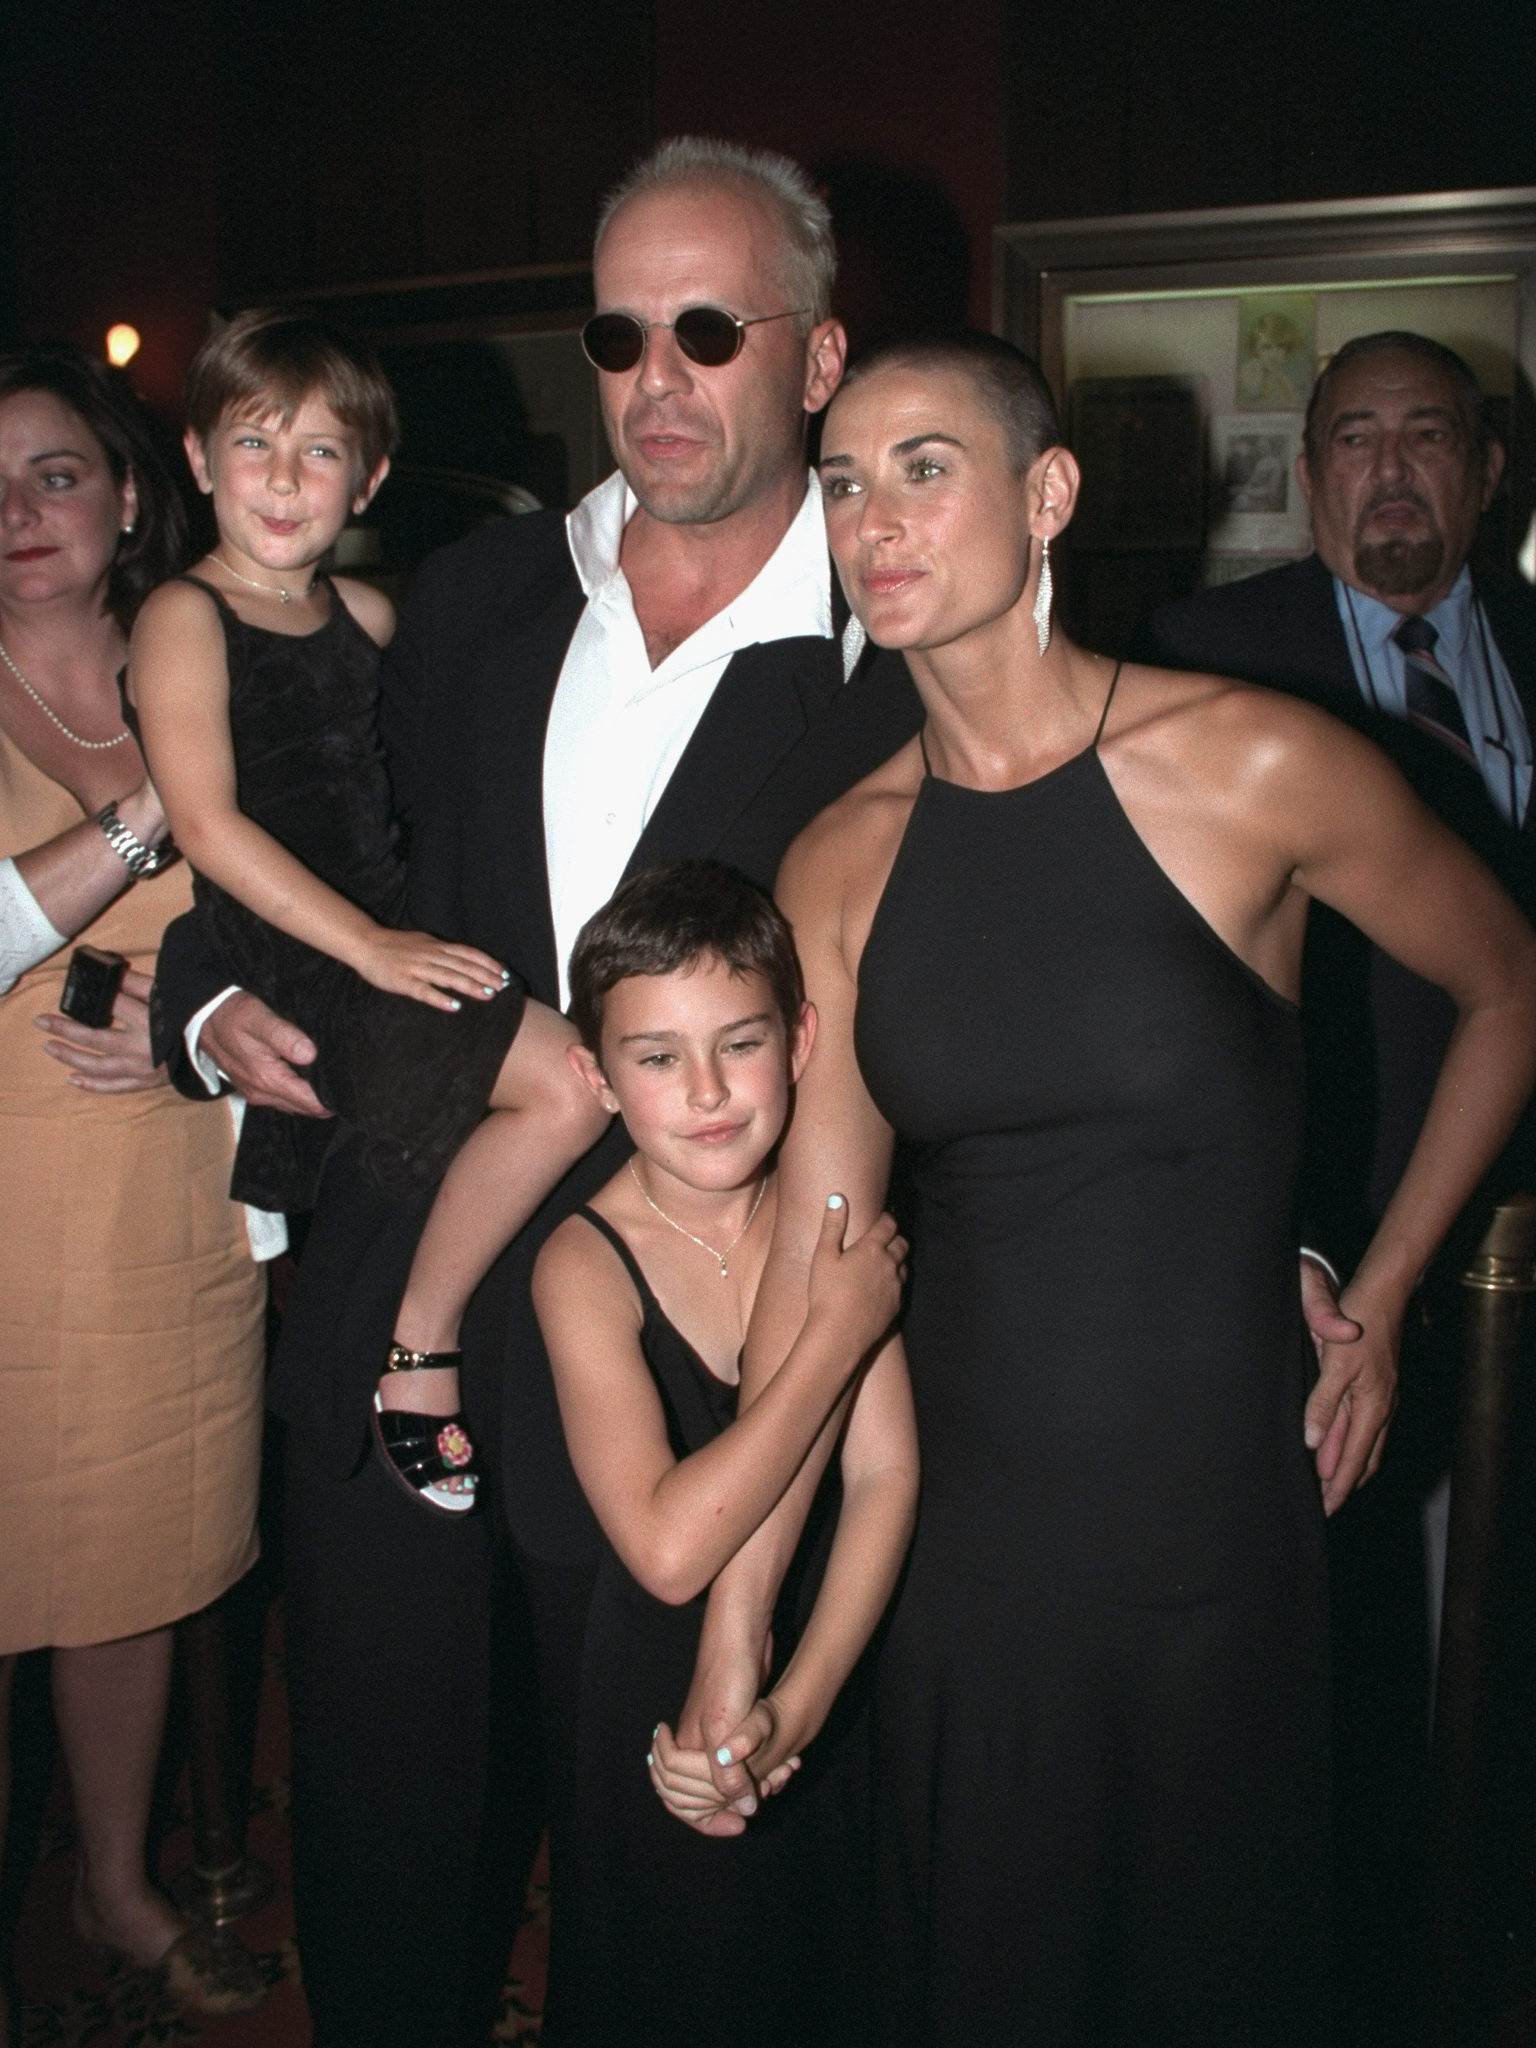 Demi Moore and Bruce Willis with daughters, Rumer and Scout, attending premiere of movie "Striptease" at the Ziegfeld Theater, on June 23, 1996. | Source: Getty Images